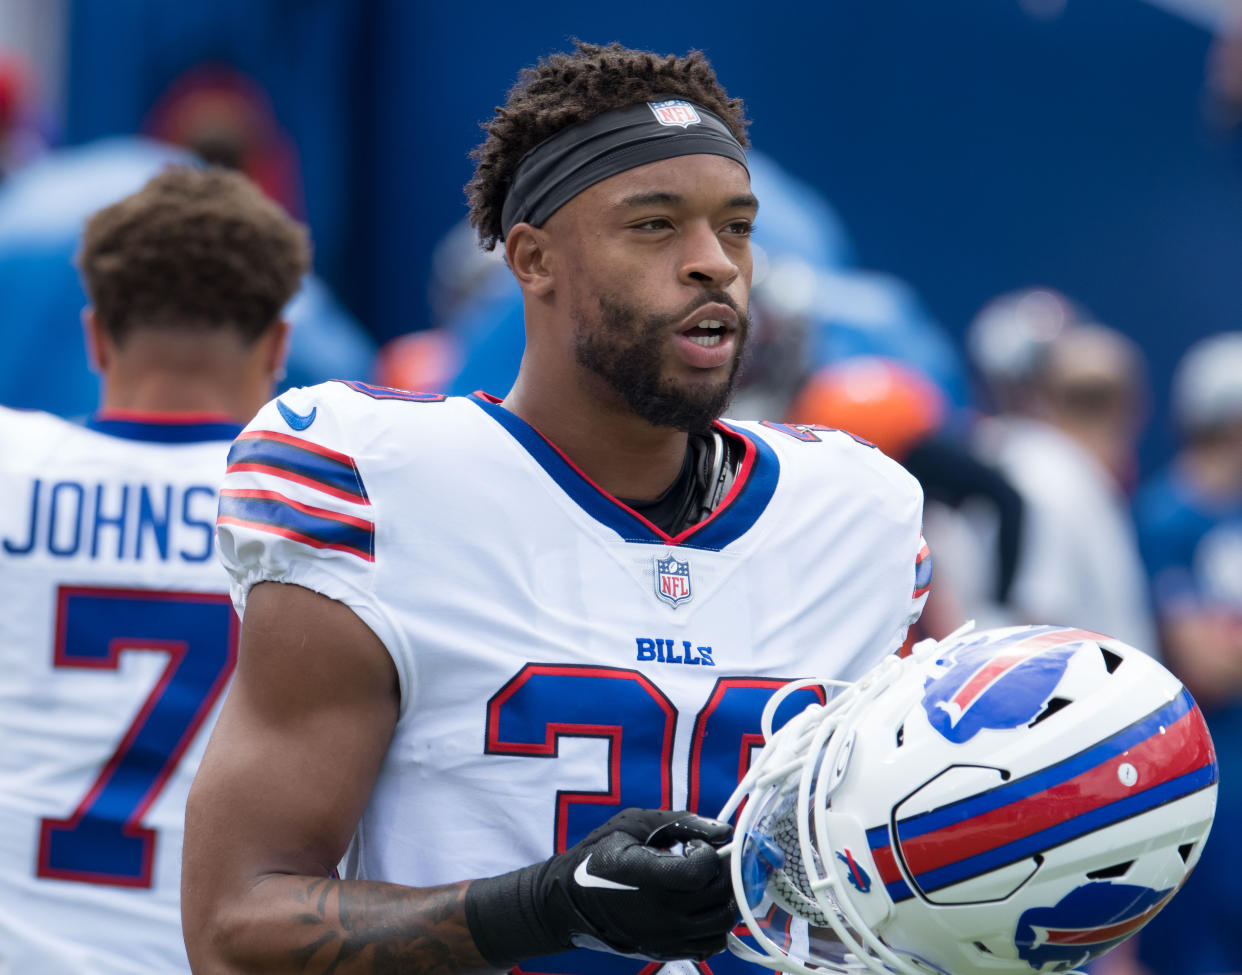 Buffalo Bills cornerback Dane Jackson (30) is back at practice this week after he was involved in scary helmet-to-helmet collision in Buffalo's Week 2 game. (Mark Konezny-USA TODAY Sports)